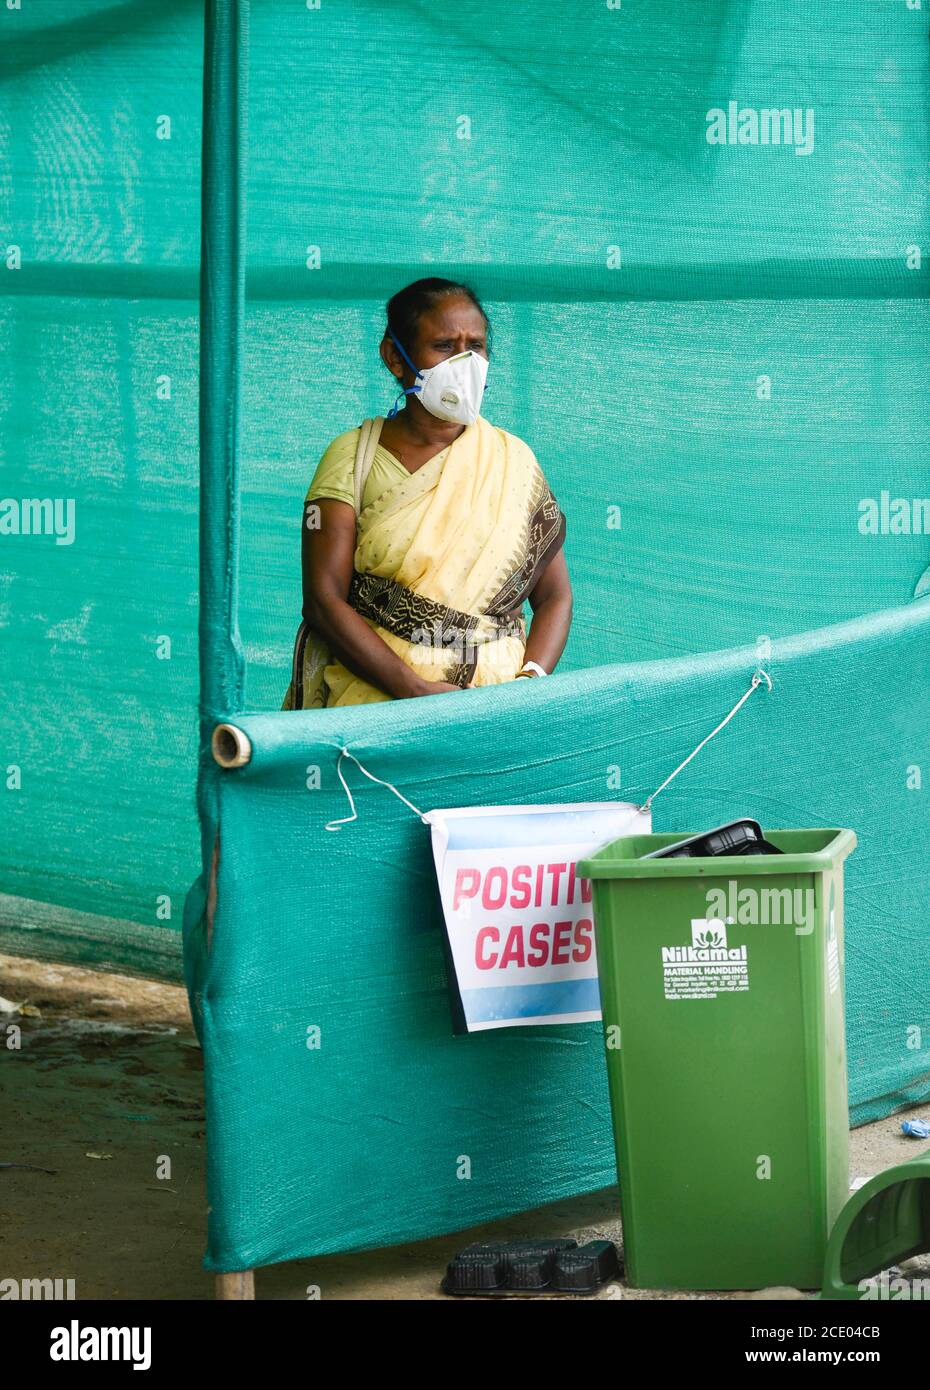 Guwahati, Assam, India. 30th Aug, 2020. A COVID-19 coronavirus positive patient waiting for an ambulance in a swab collection centre, in Guwahati. Assam crossed the one lakh(100 Thousand) coronavirus cases mark on Friday night 28 August 2020. Credit: David Talukdar/ZUMA Wire/Alamy Live News Stock Photo